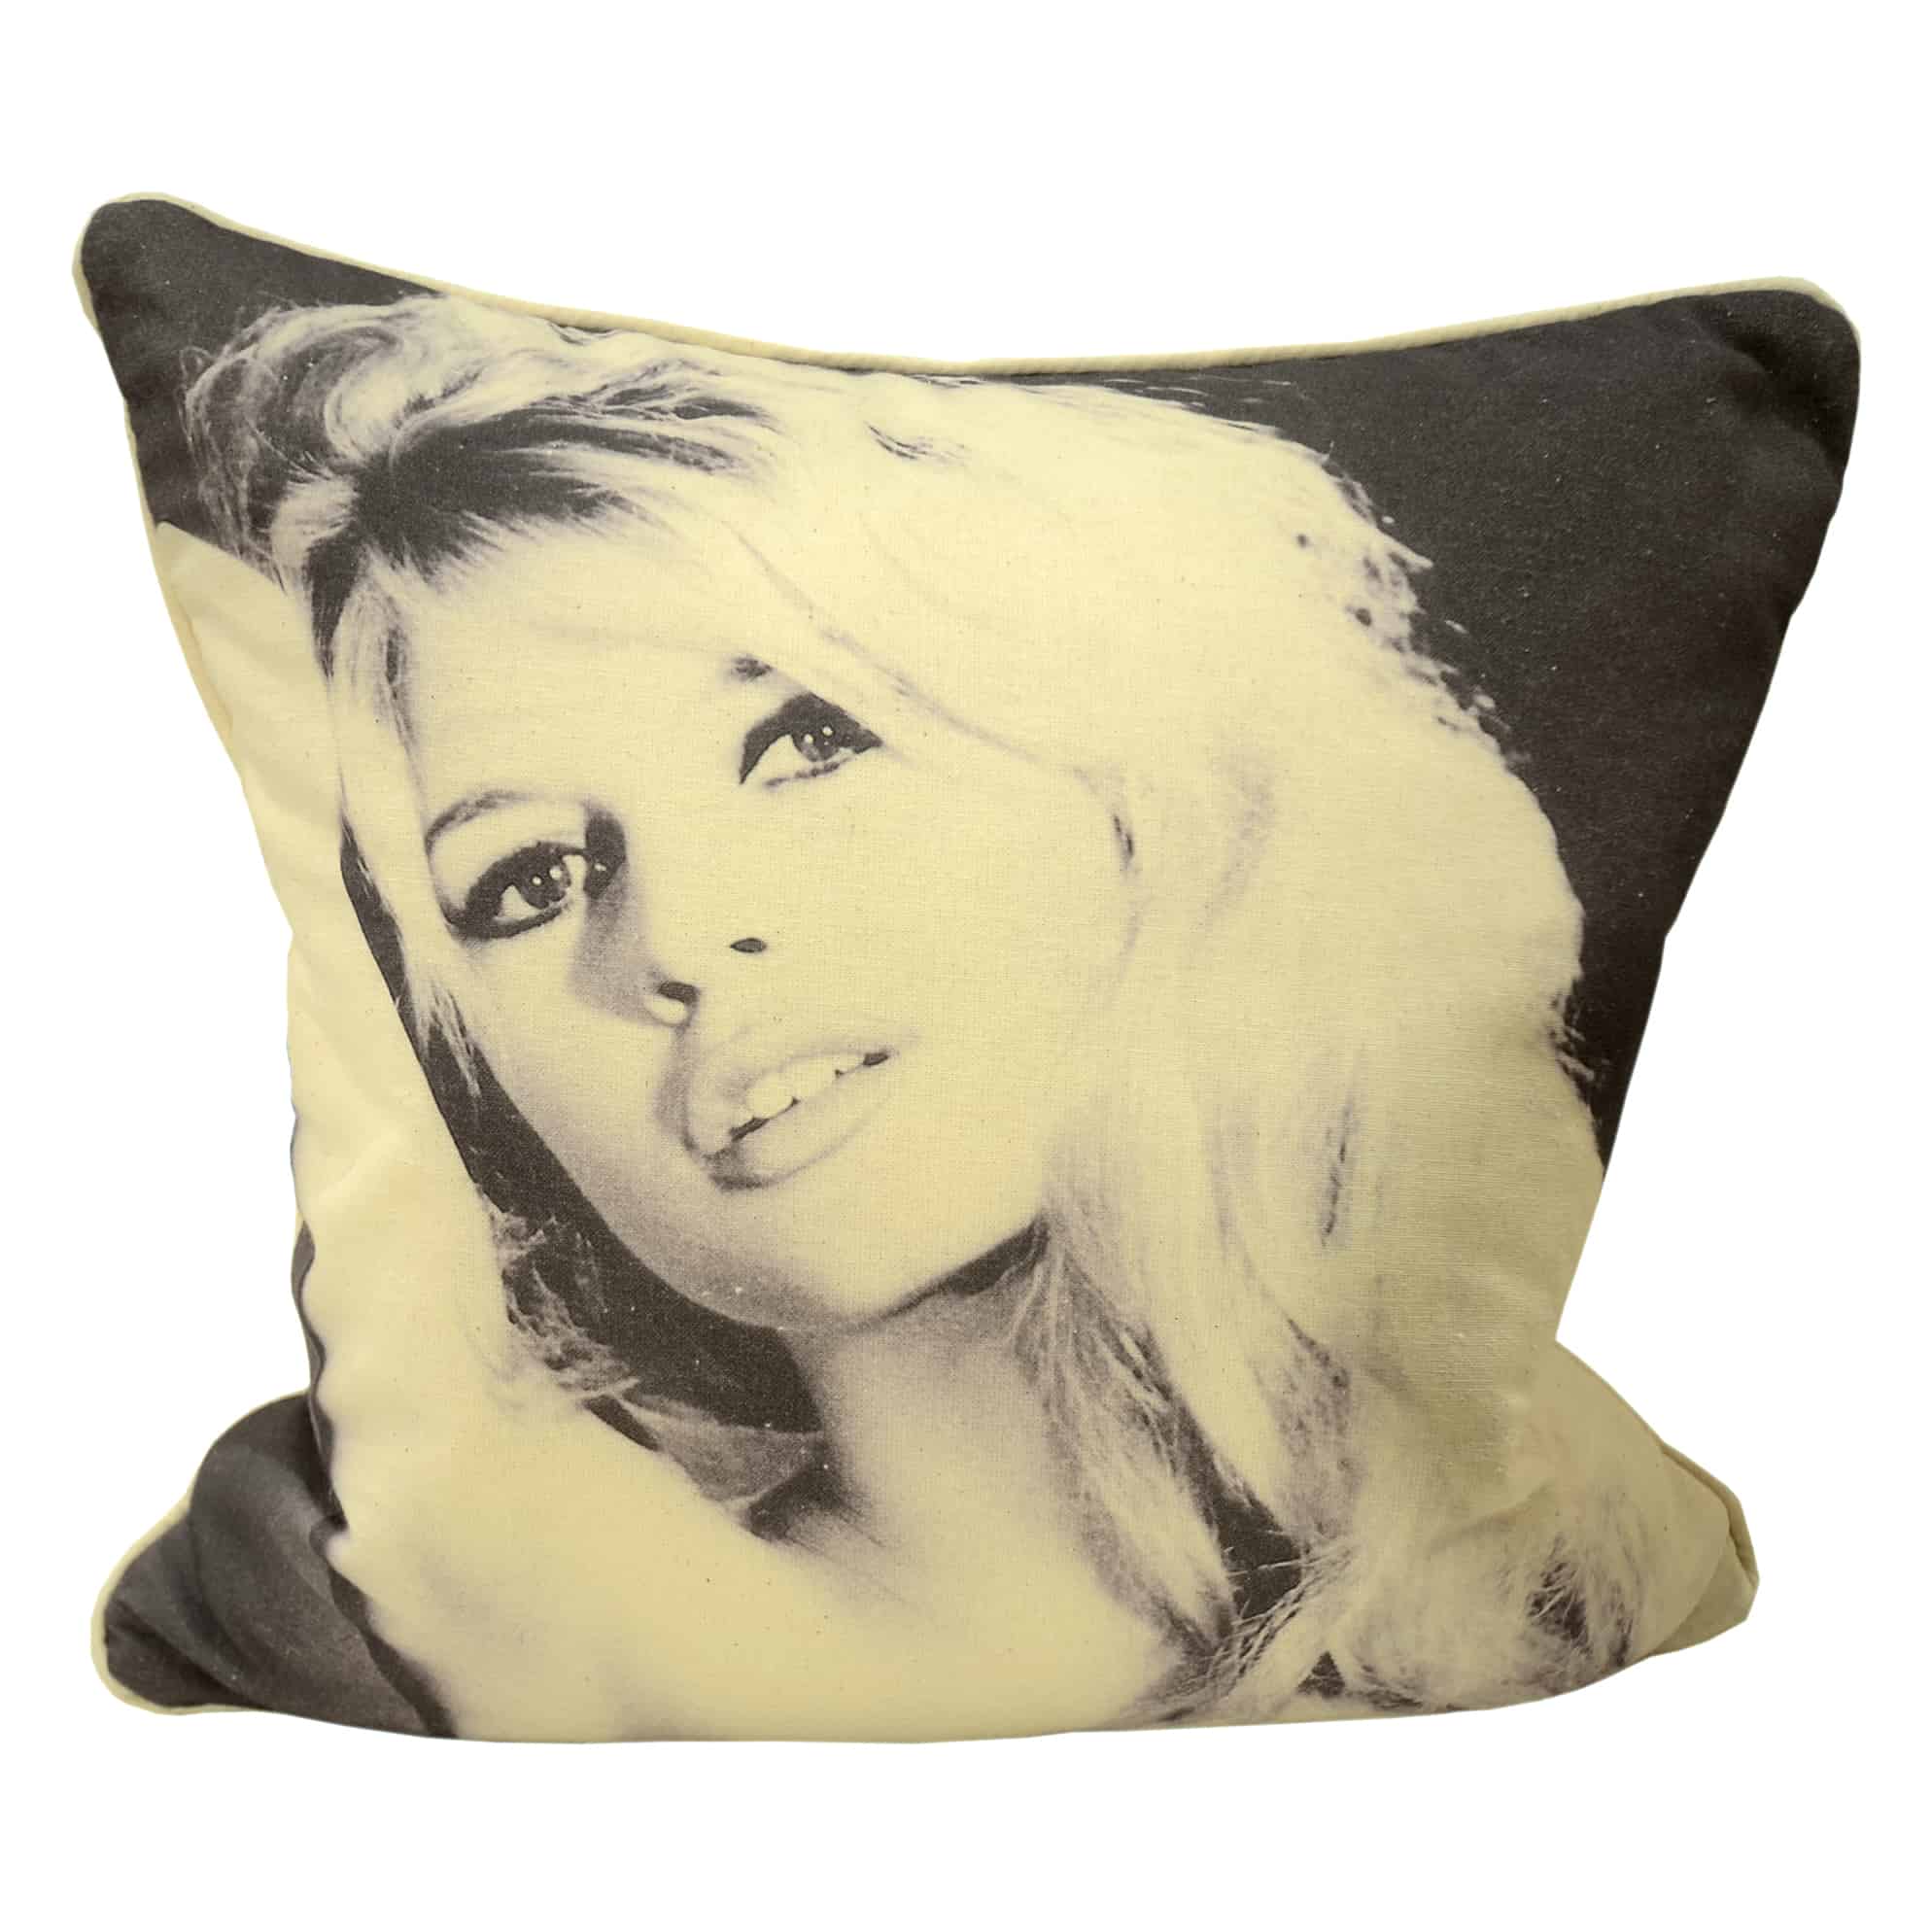 brigitte bardot scatter cushions. Limited print run black and white portrait collection